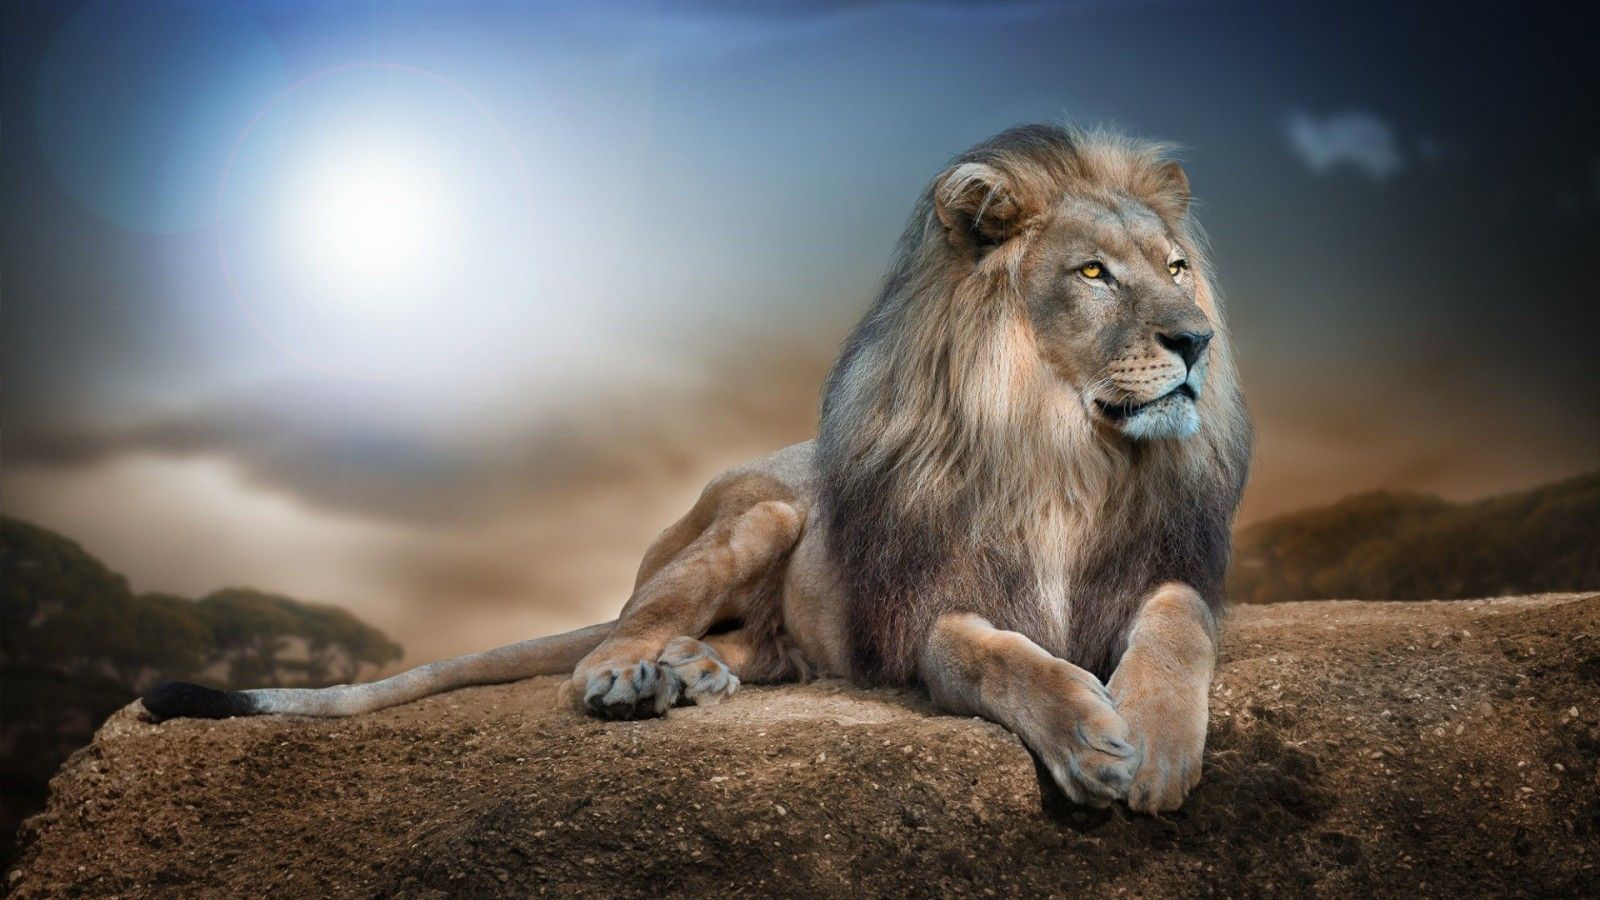 Hd Wallpaper Of Lion For Mobile